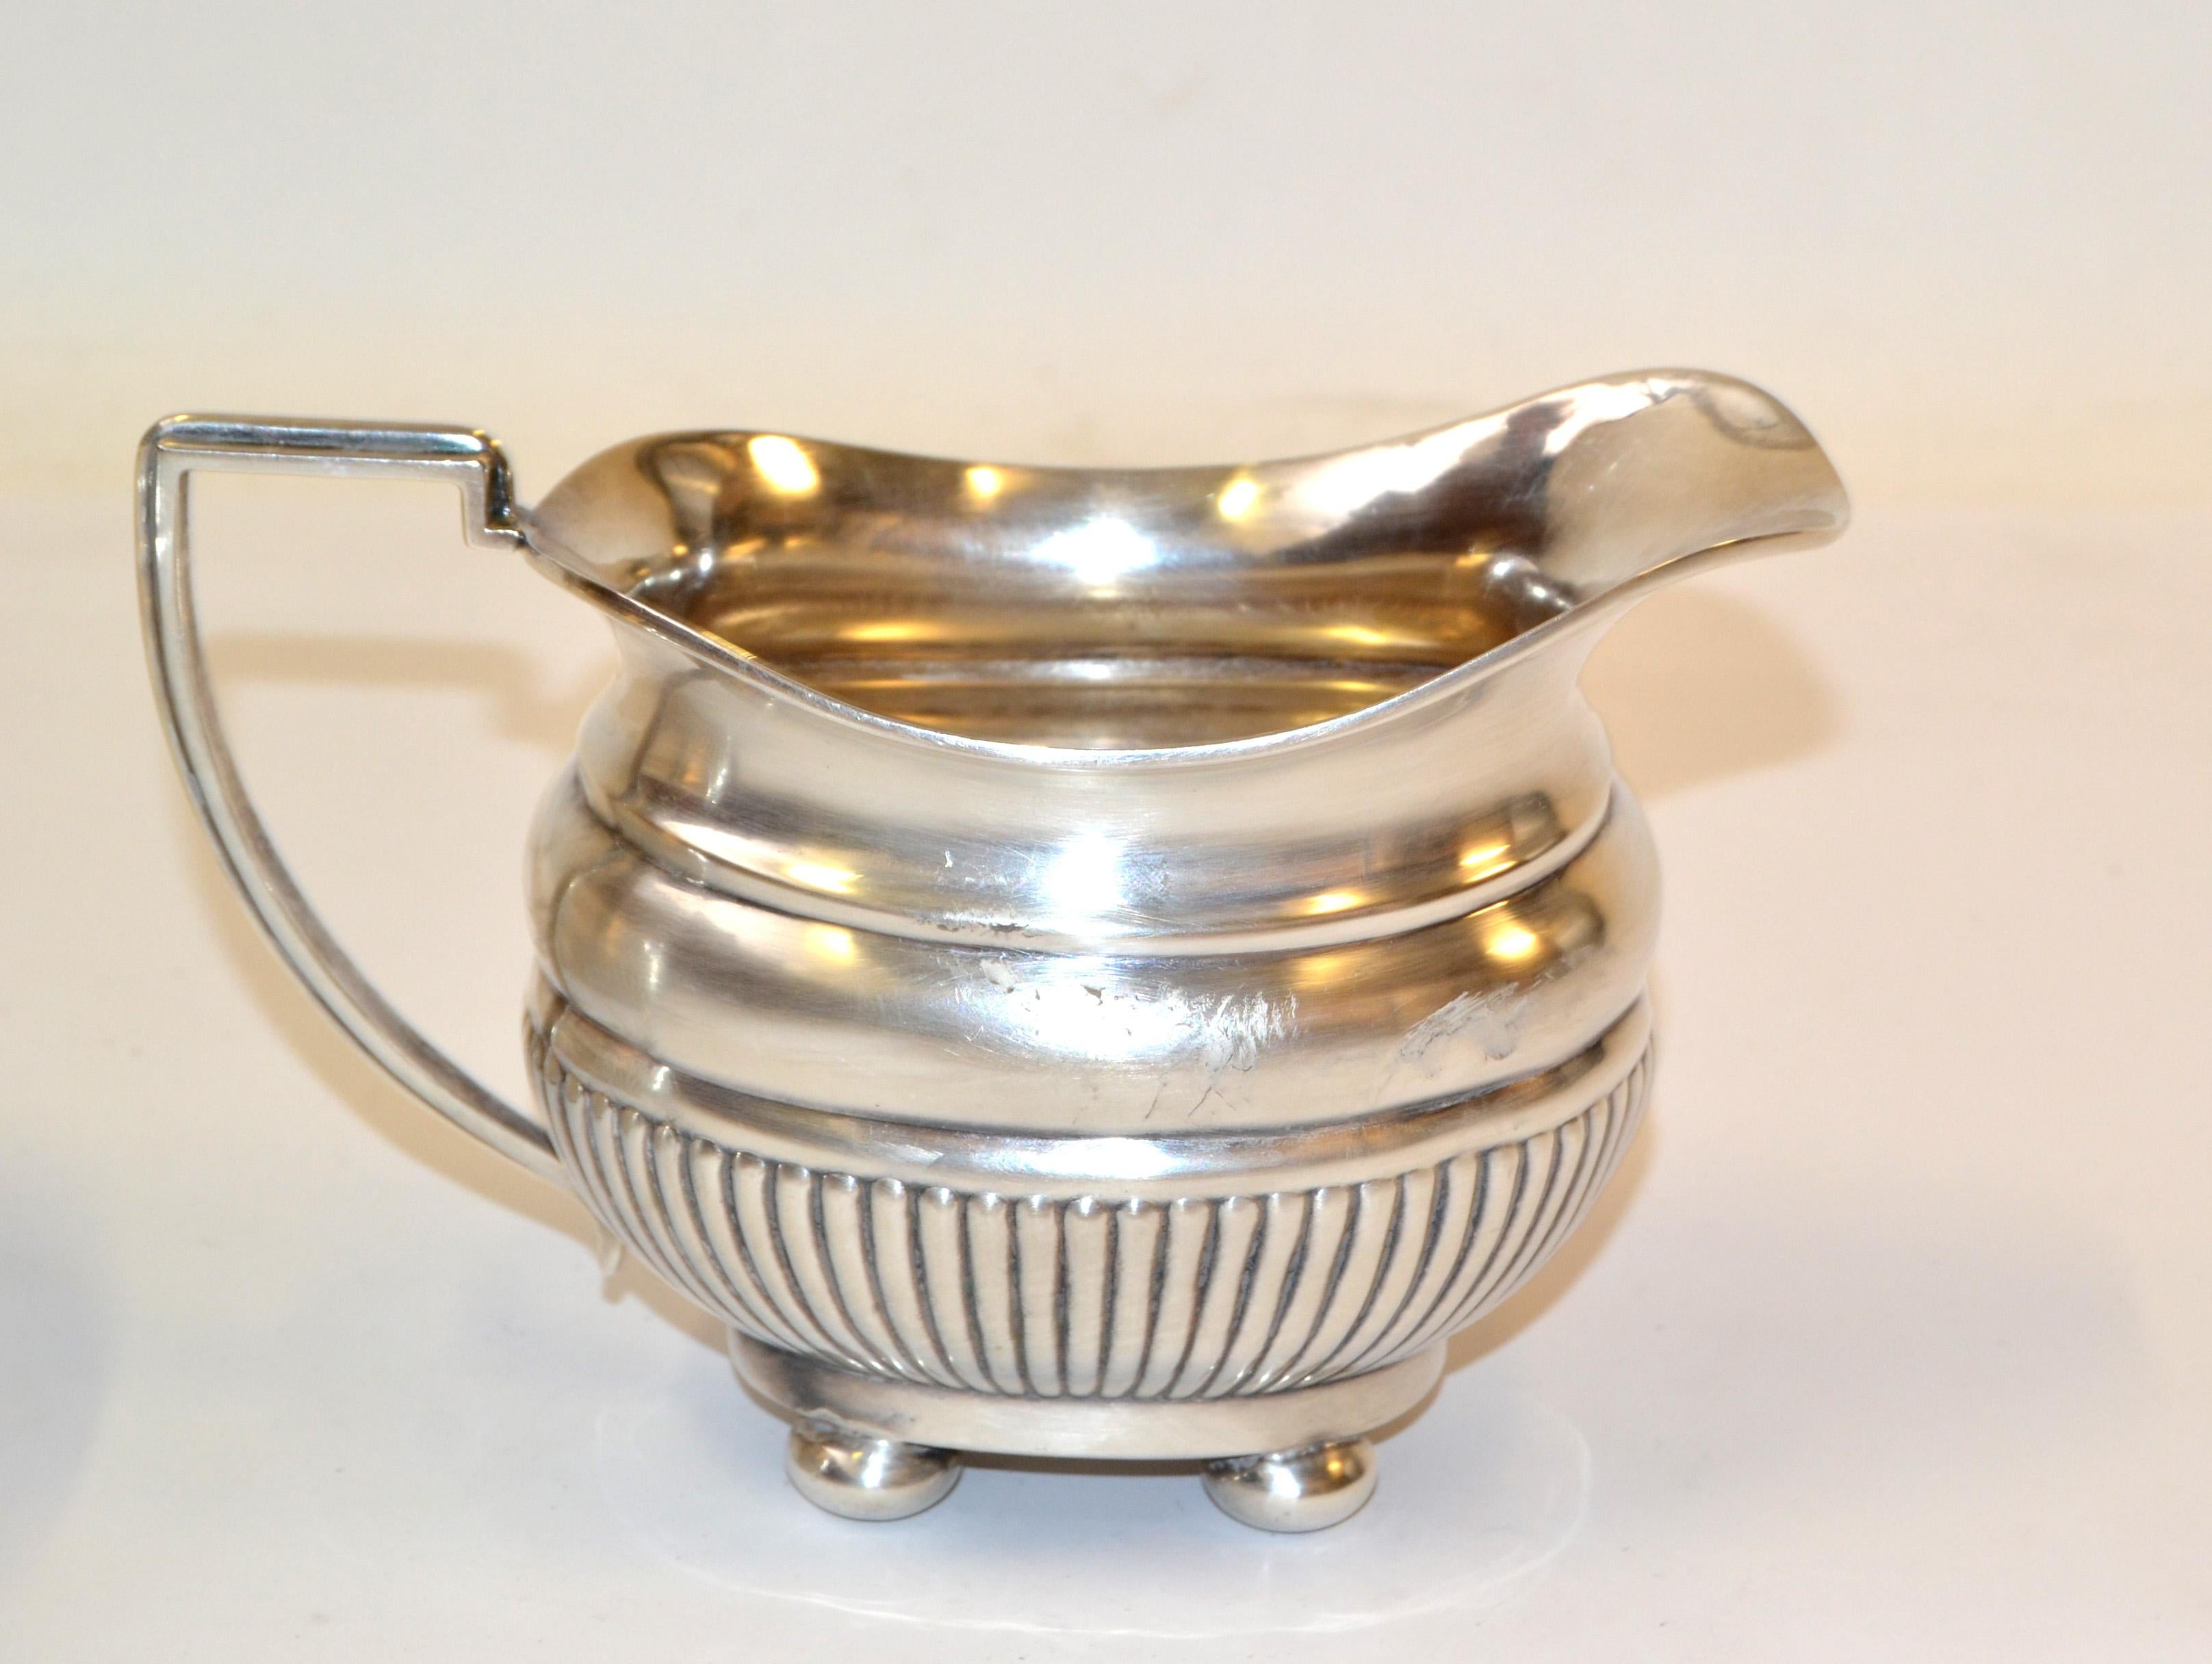 British Colonial Antique 1910 Cheltenham Silver Coffee Service Sheffield England For Sale 4